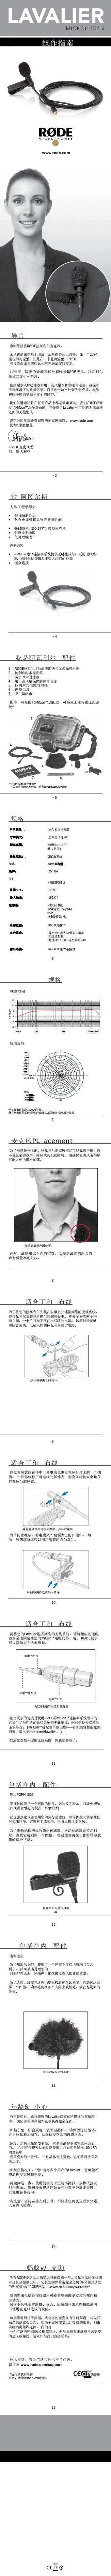 Lavalier_product_manual_1_16_translate_0.png